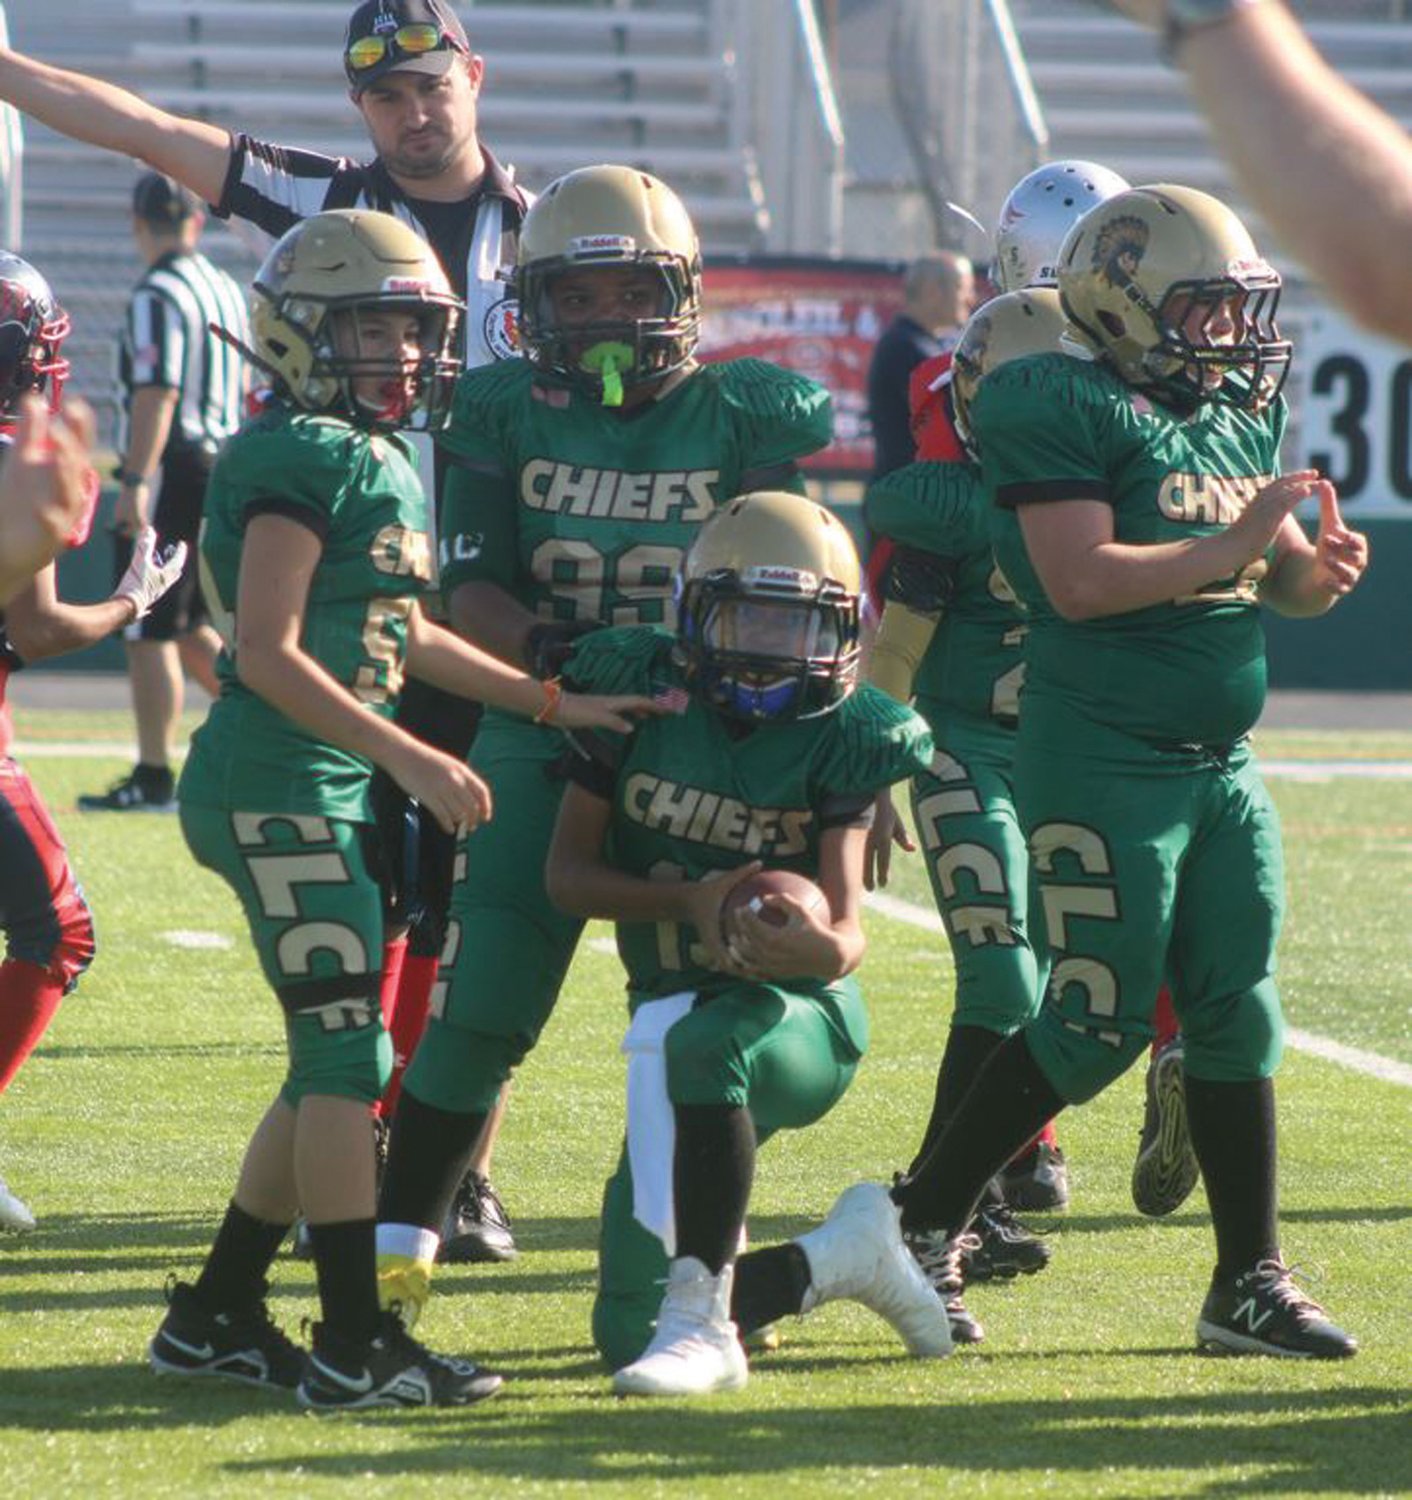 RECOVERY:  The CLCF 10-U team celebrates after recovering a fumble.